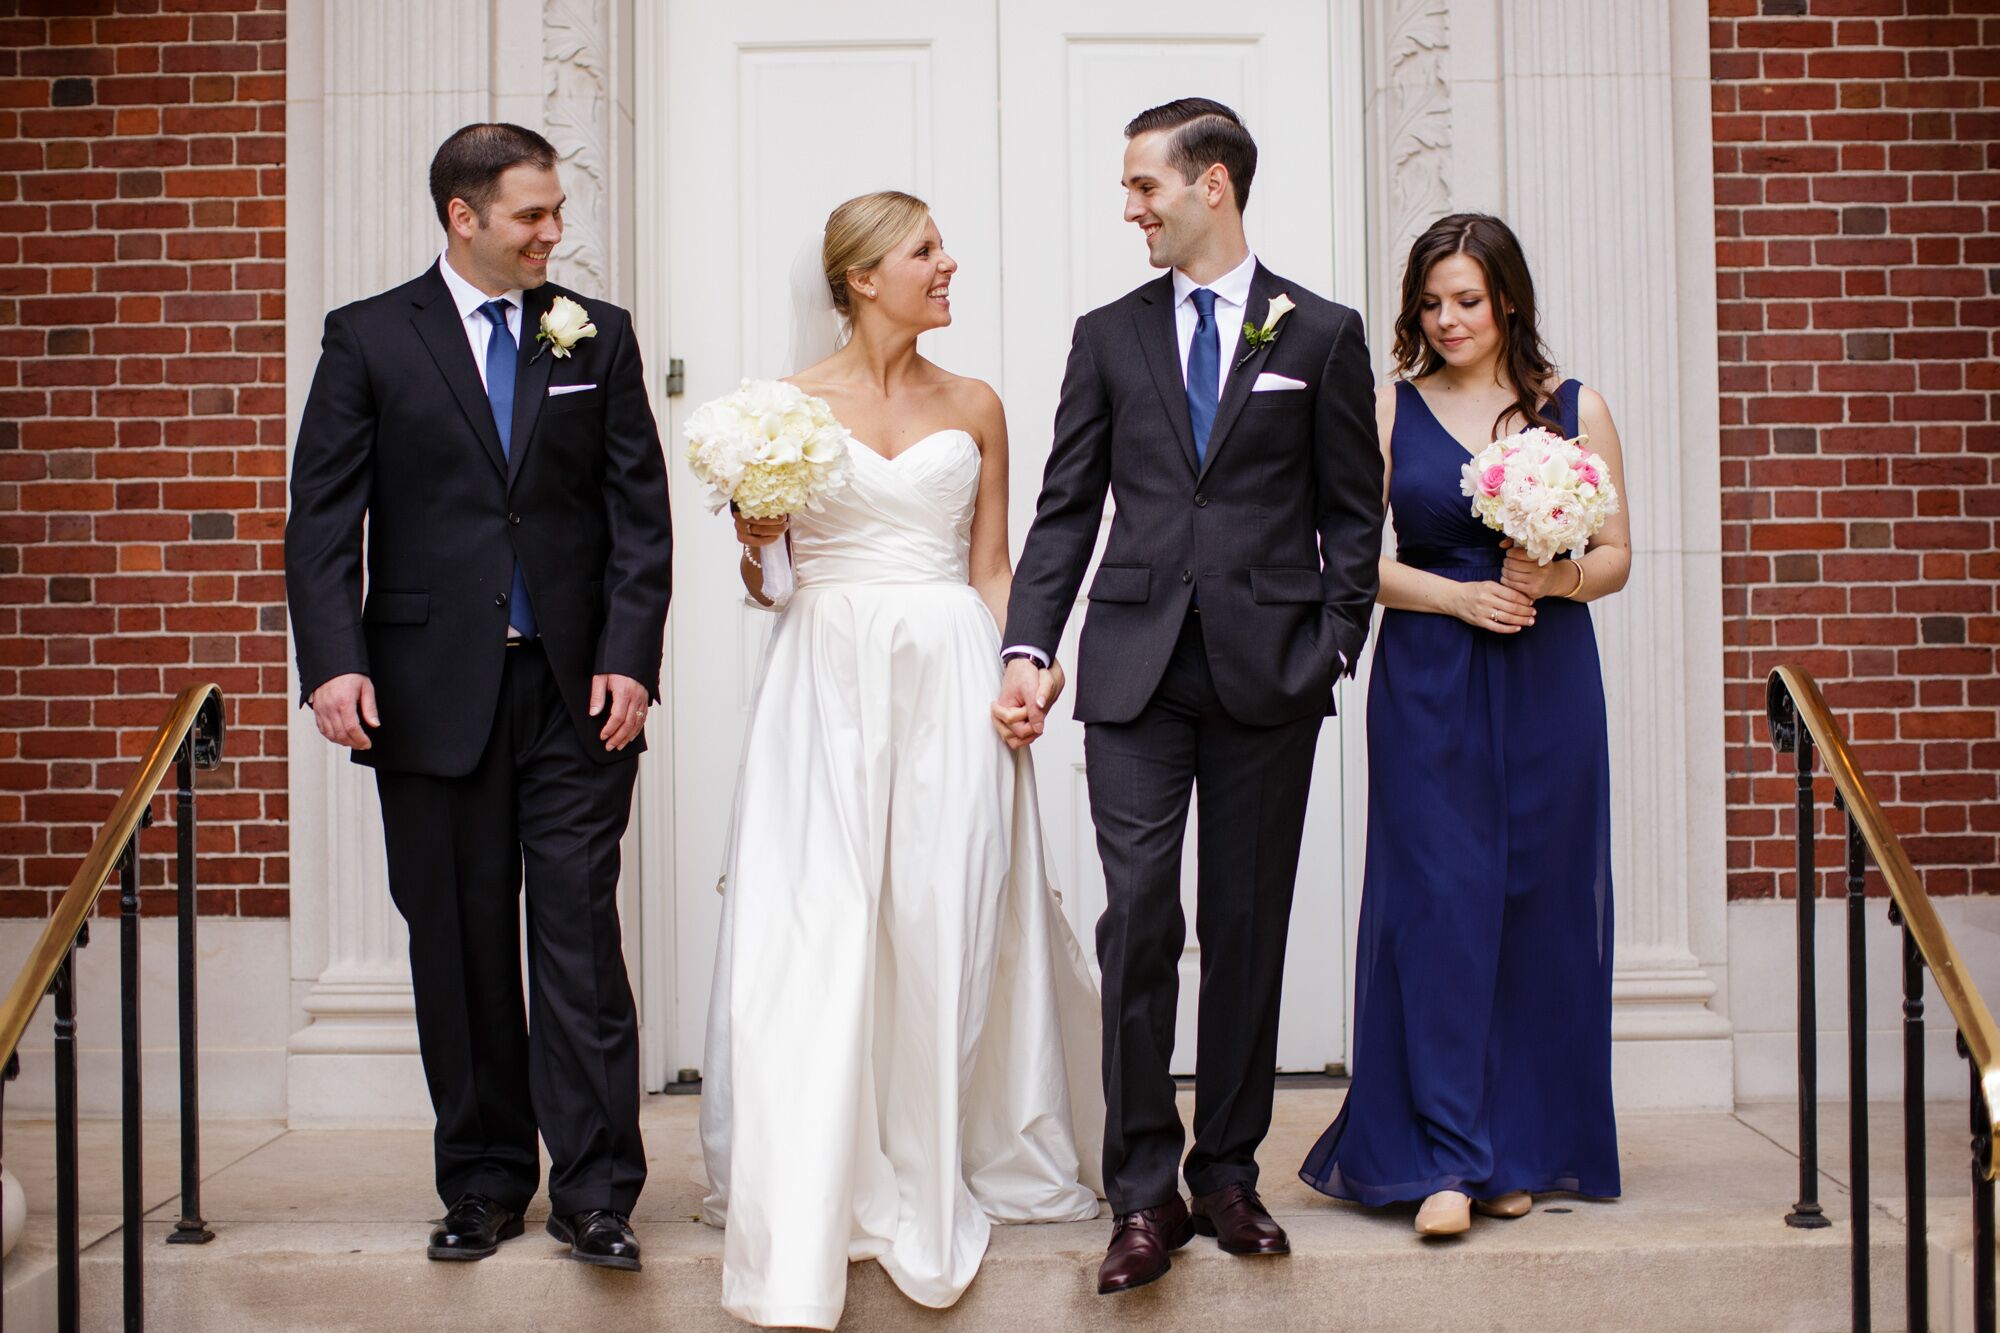 wedding dresses with navy blue accents